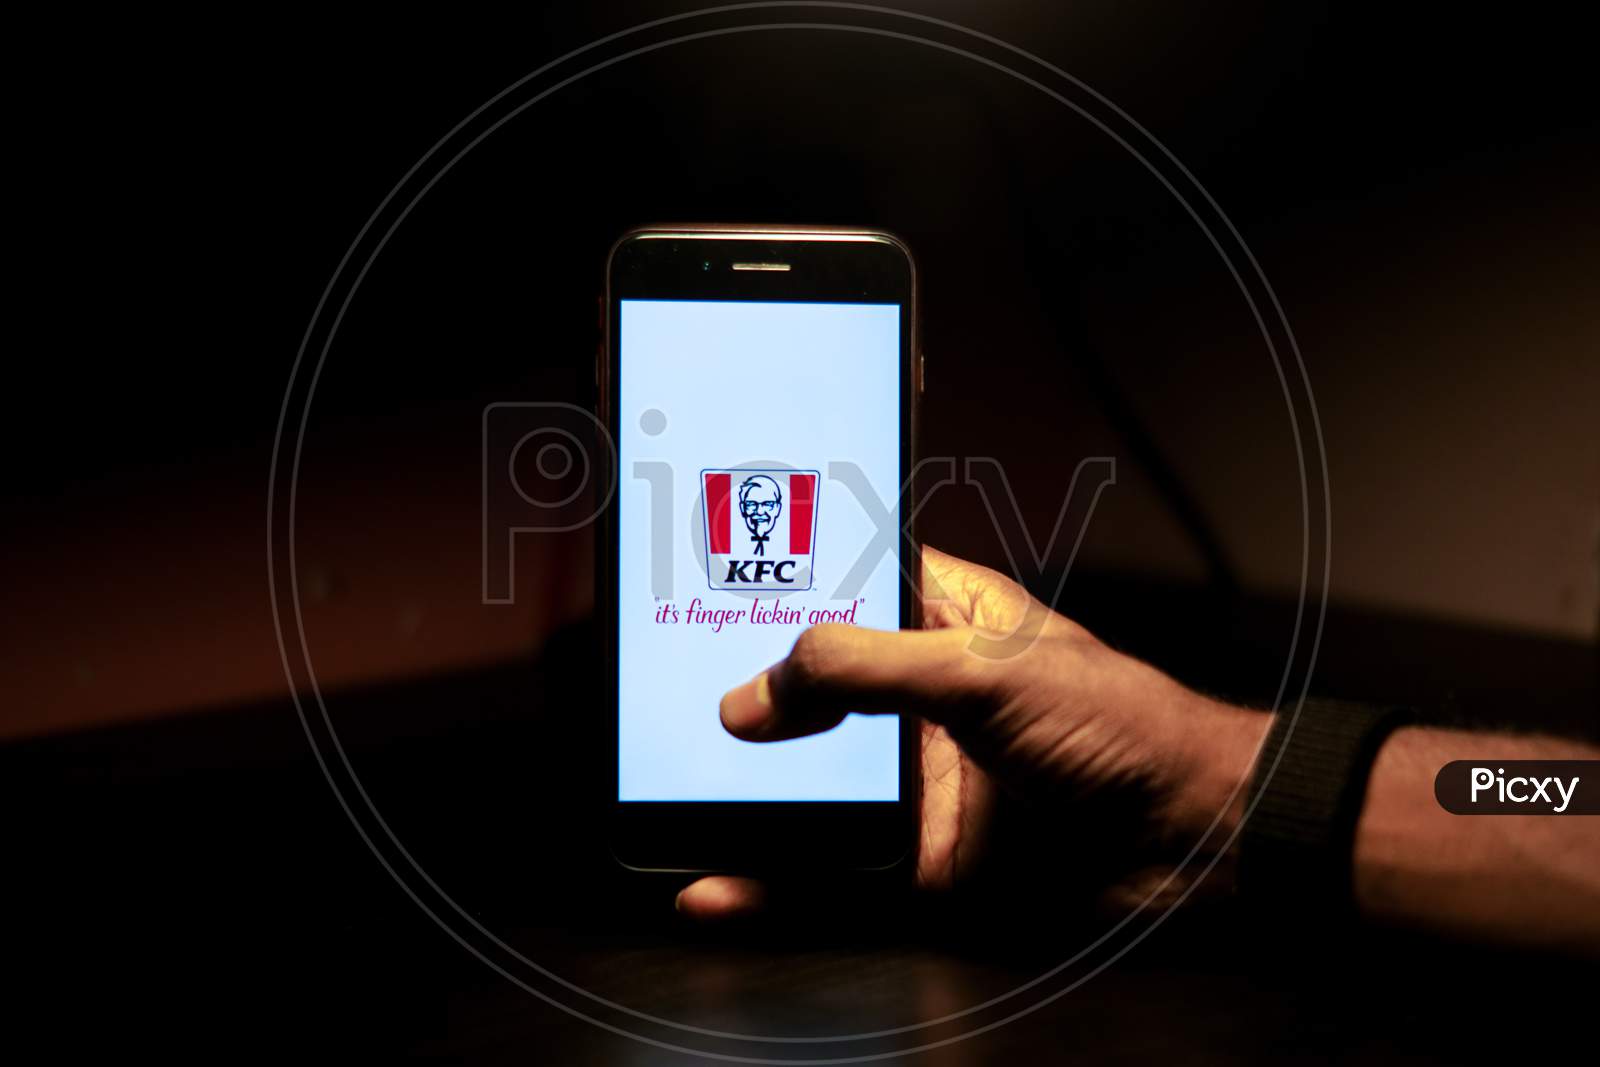 KFC Mobile App Icon Opening on Smartphone Screen Closeup With Finger